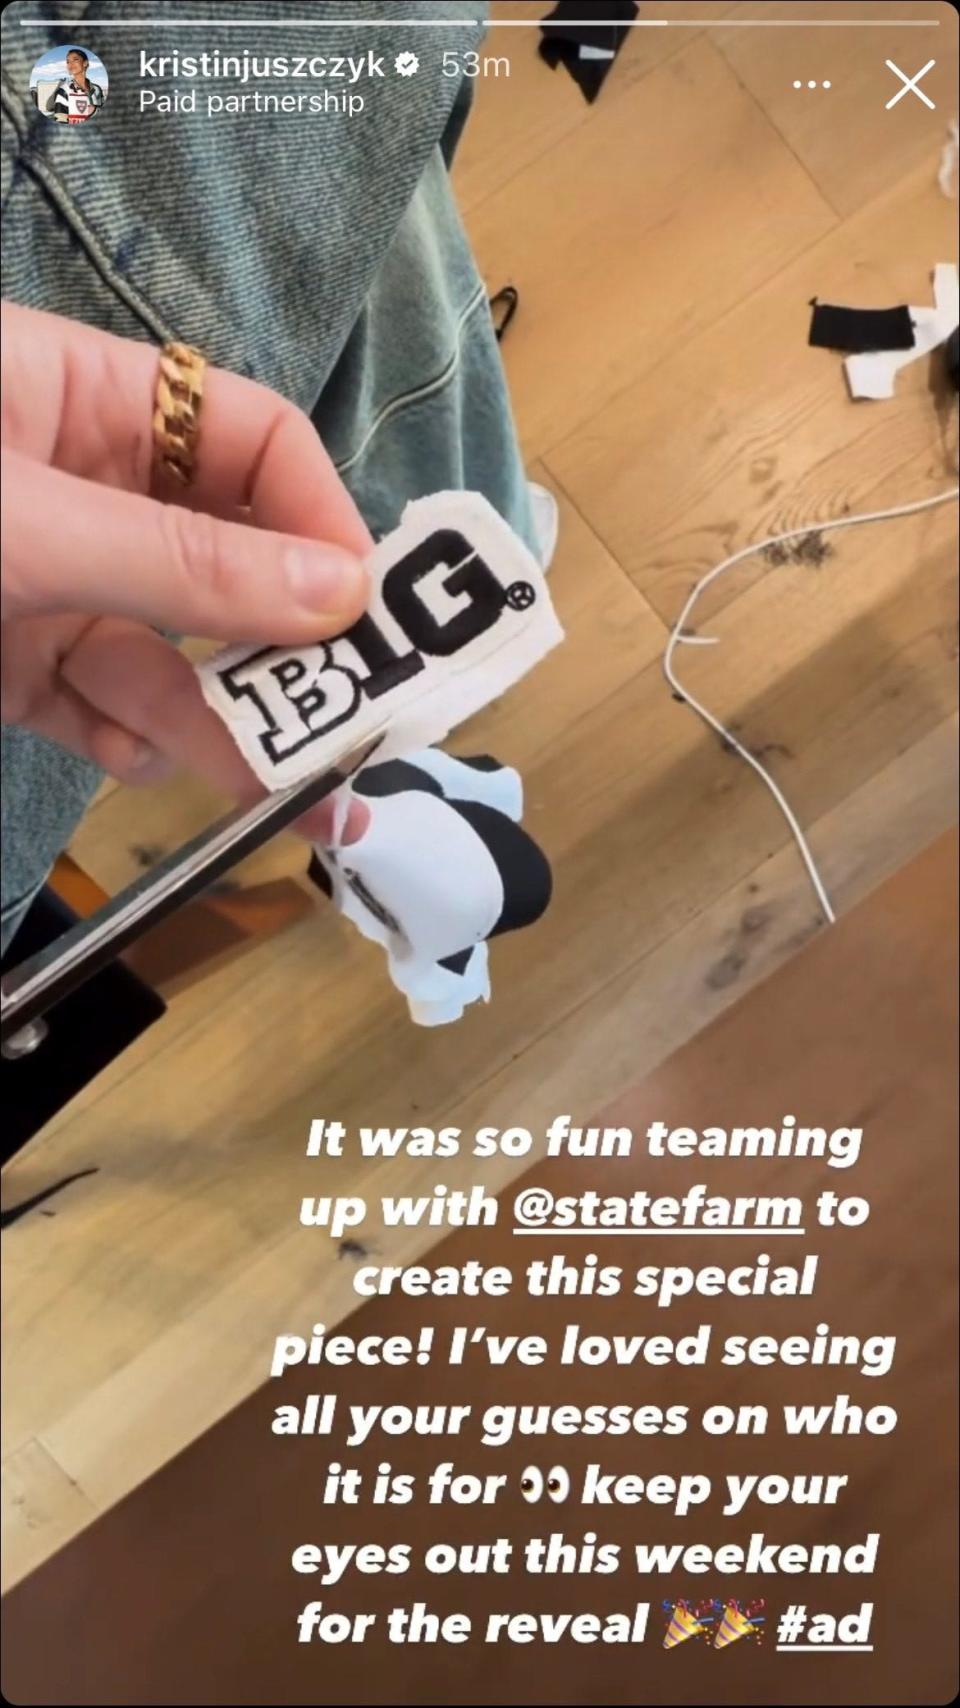 New York designer Kristin Juszczyk posts to her Instagram Friday a second teaser about her next custom design. All signs point to it being made for Caitlin Clark.